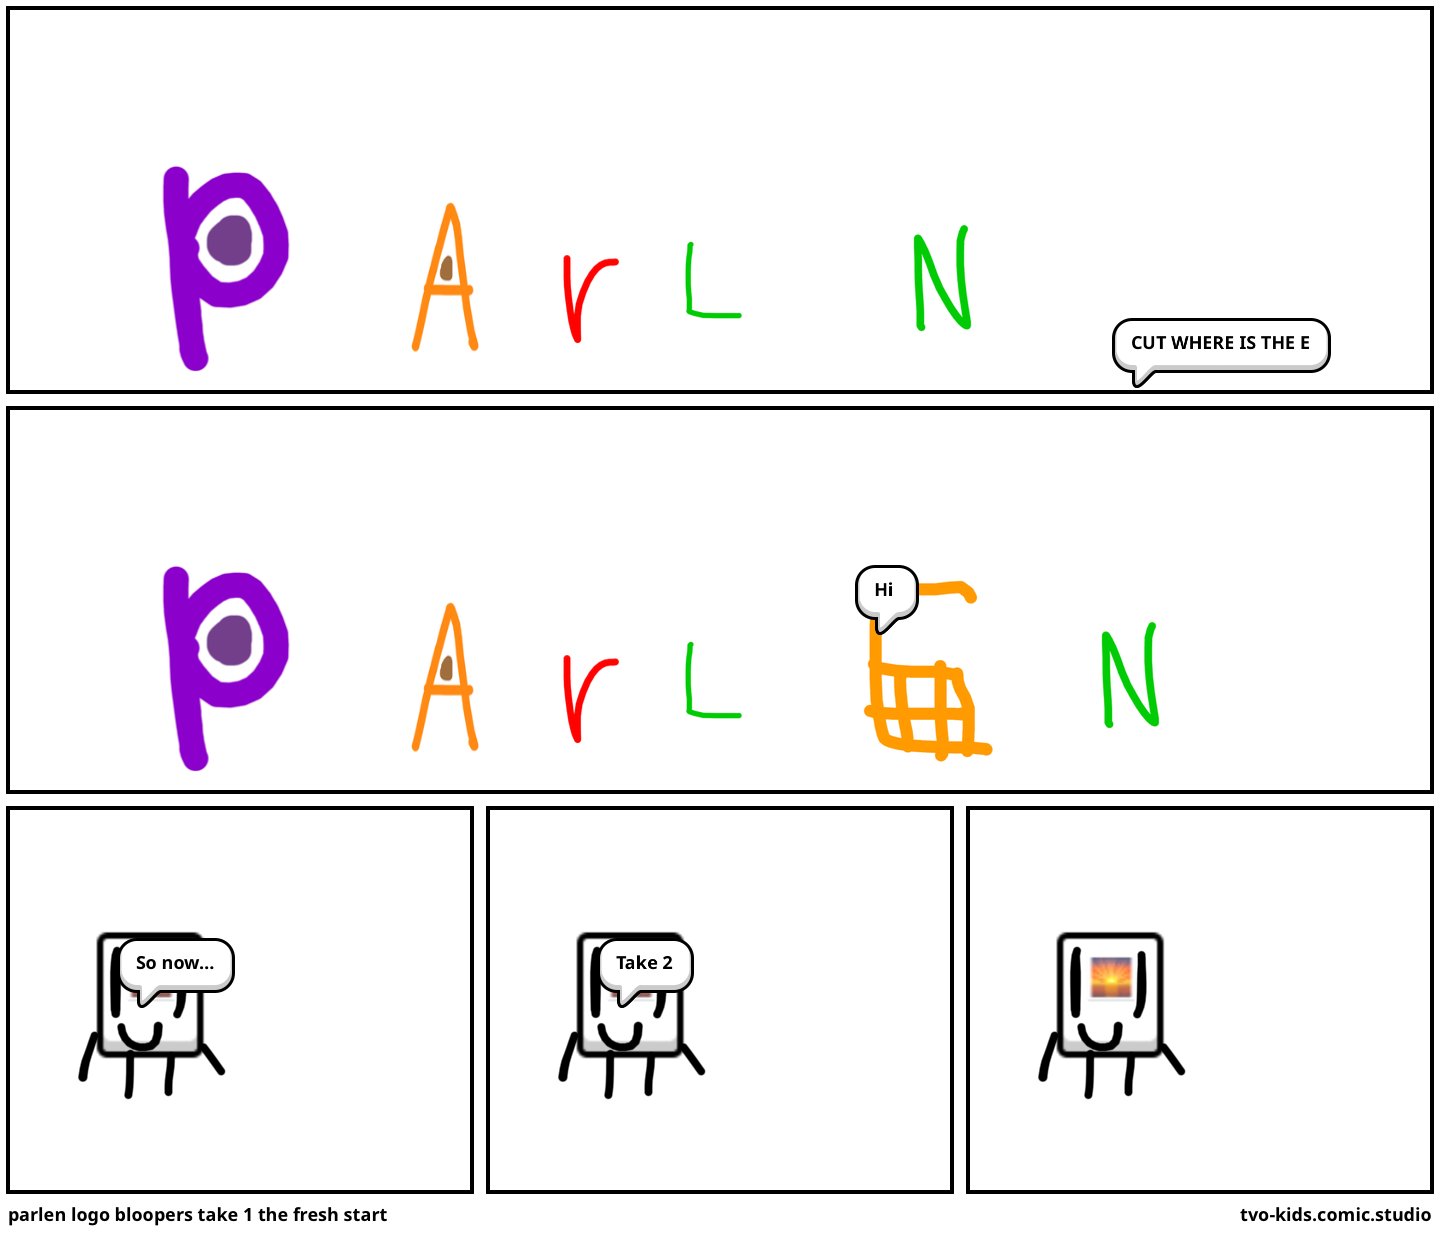 parlen logo bloopers take 19 a different user :/ - Comic Studio